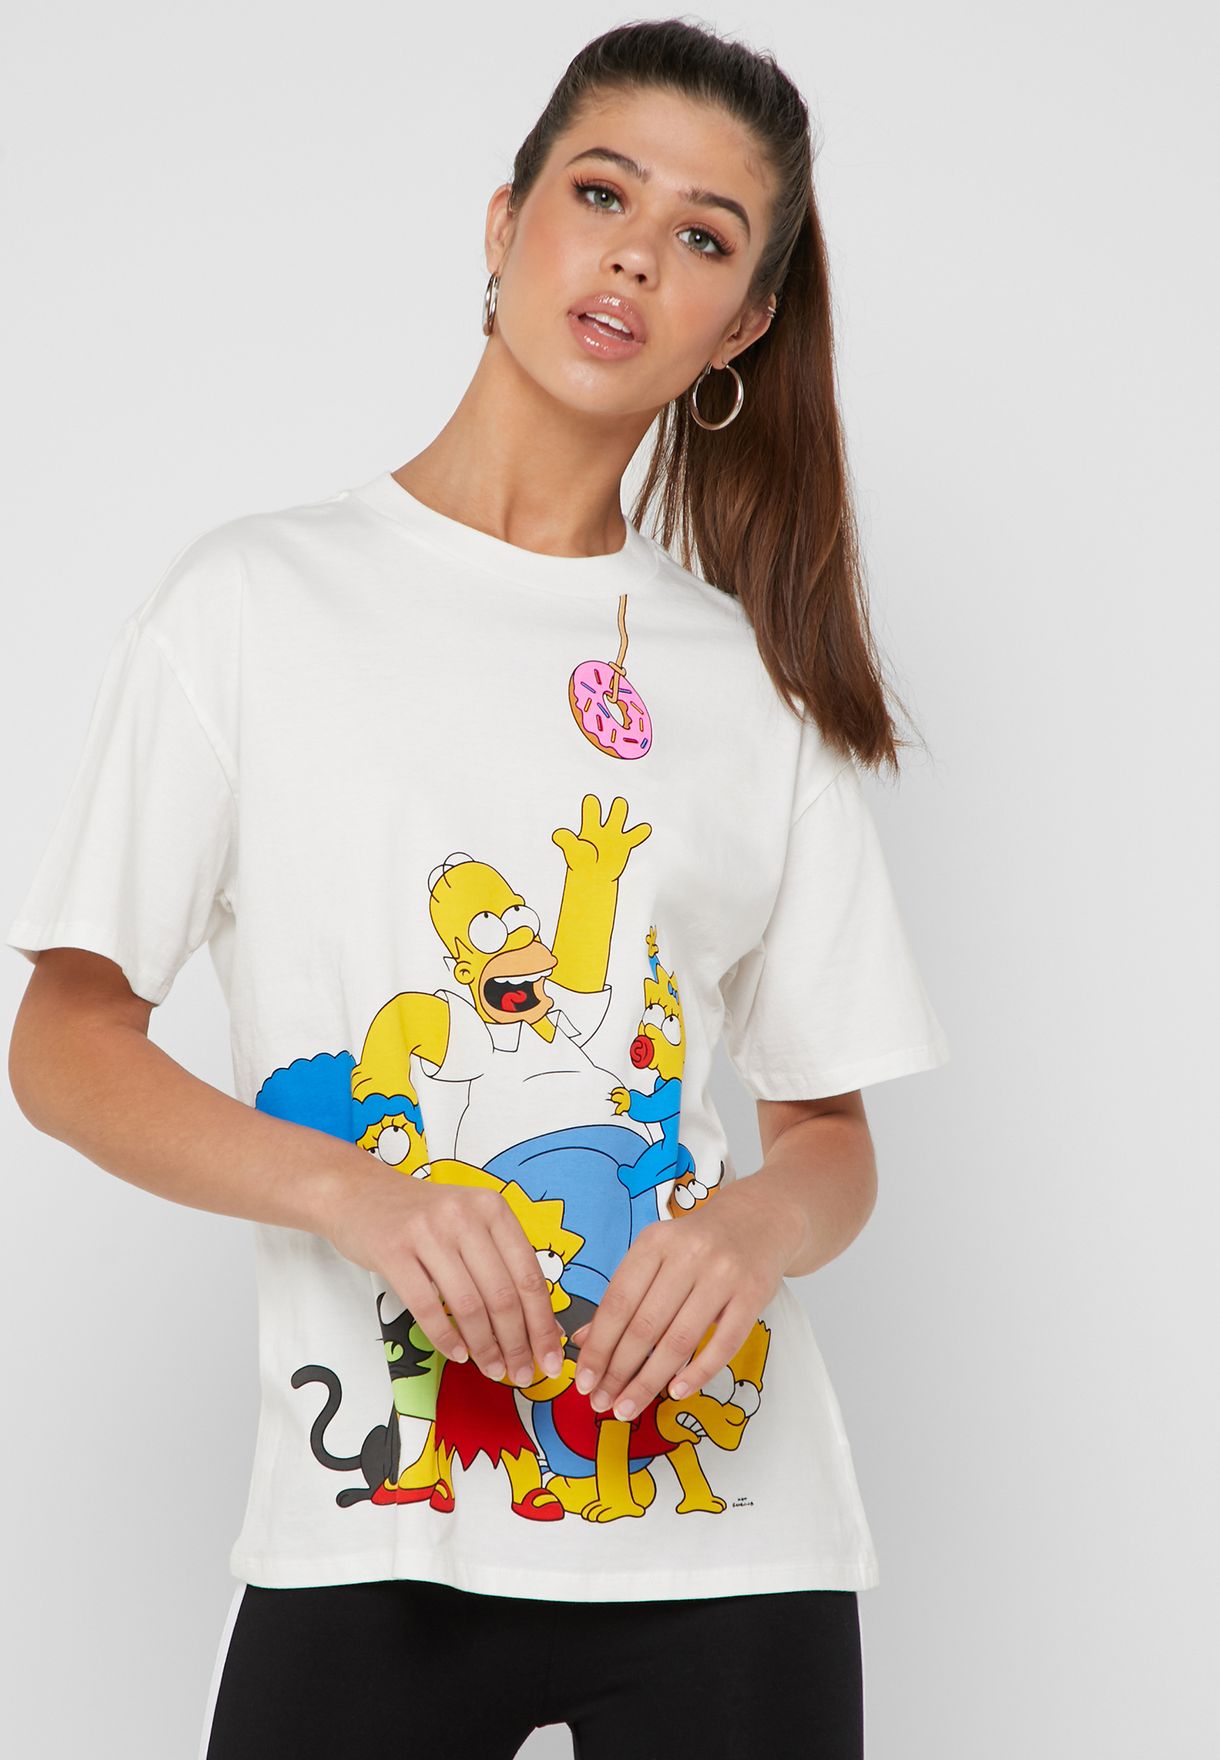 forever 21 graphic t shirts